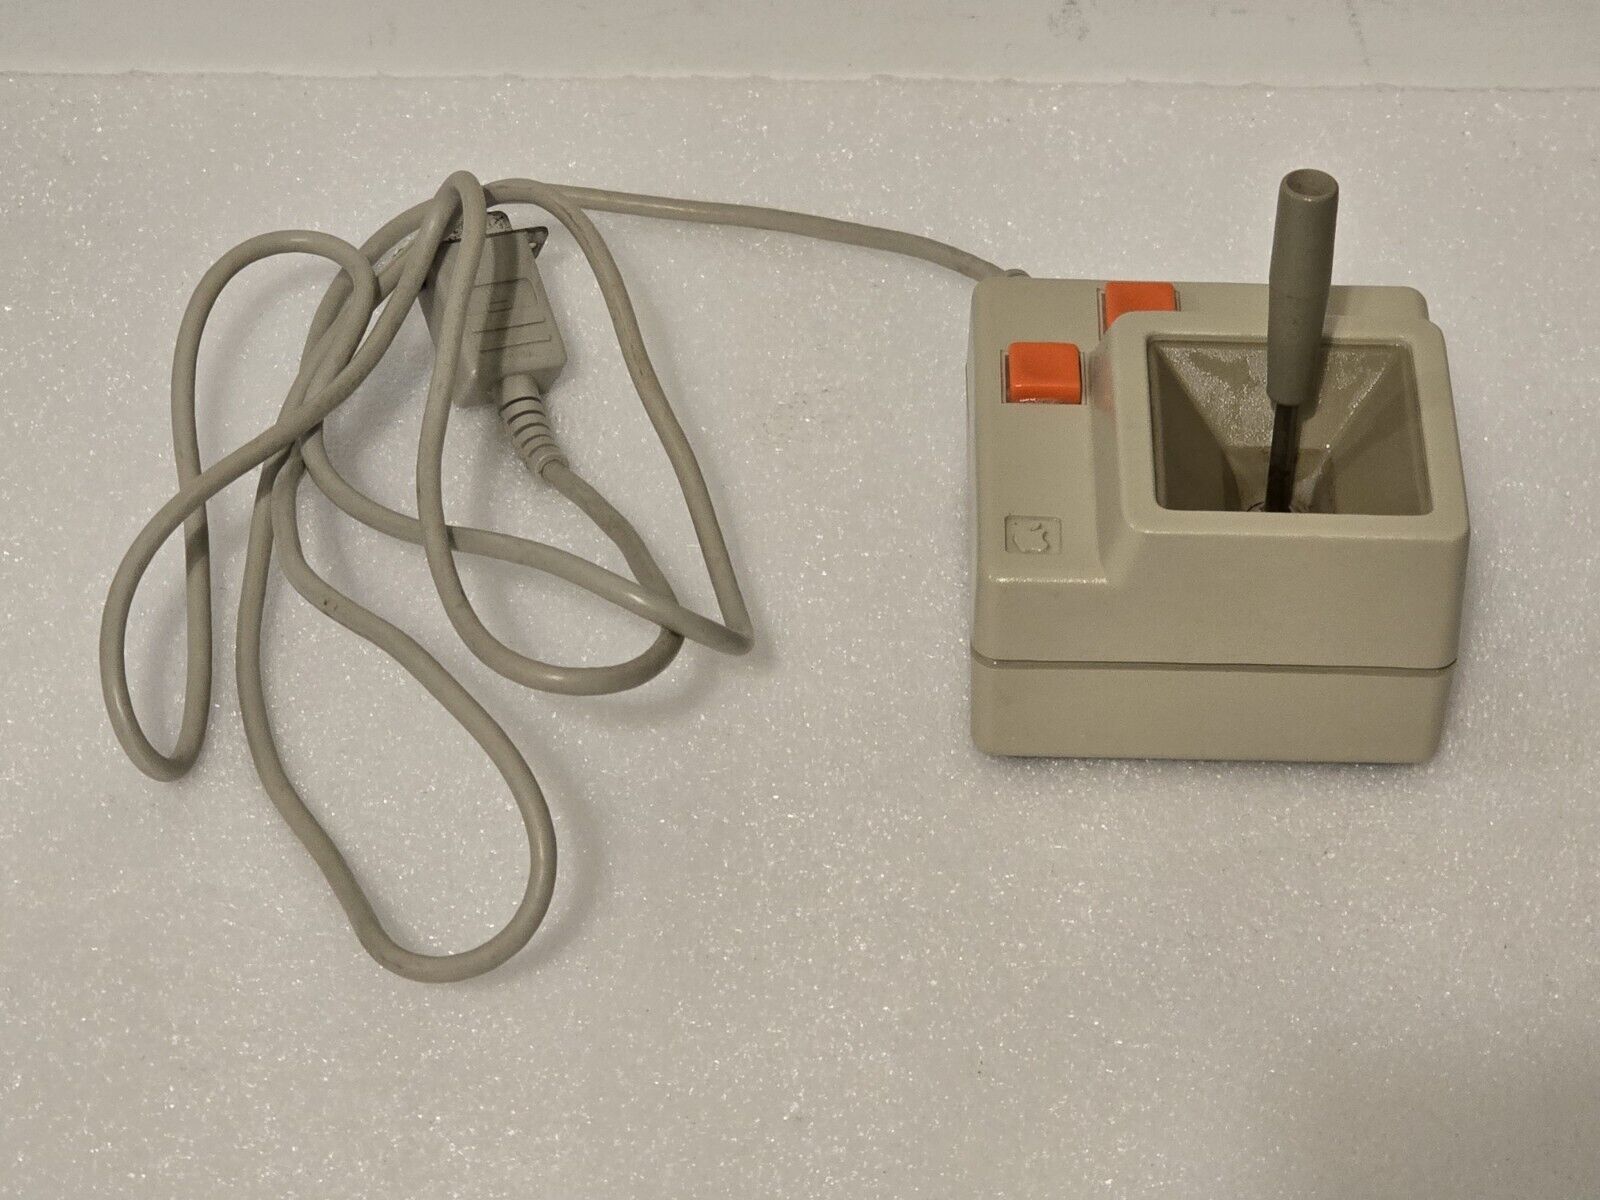 Vtg Genuine Apple Computer JOYSTICK IIe IIc A2M2002 2E 2C Controller Tested AsIs